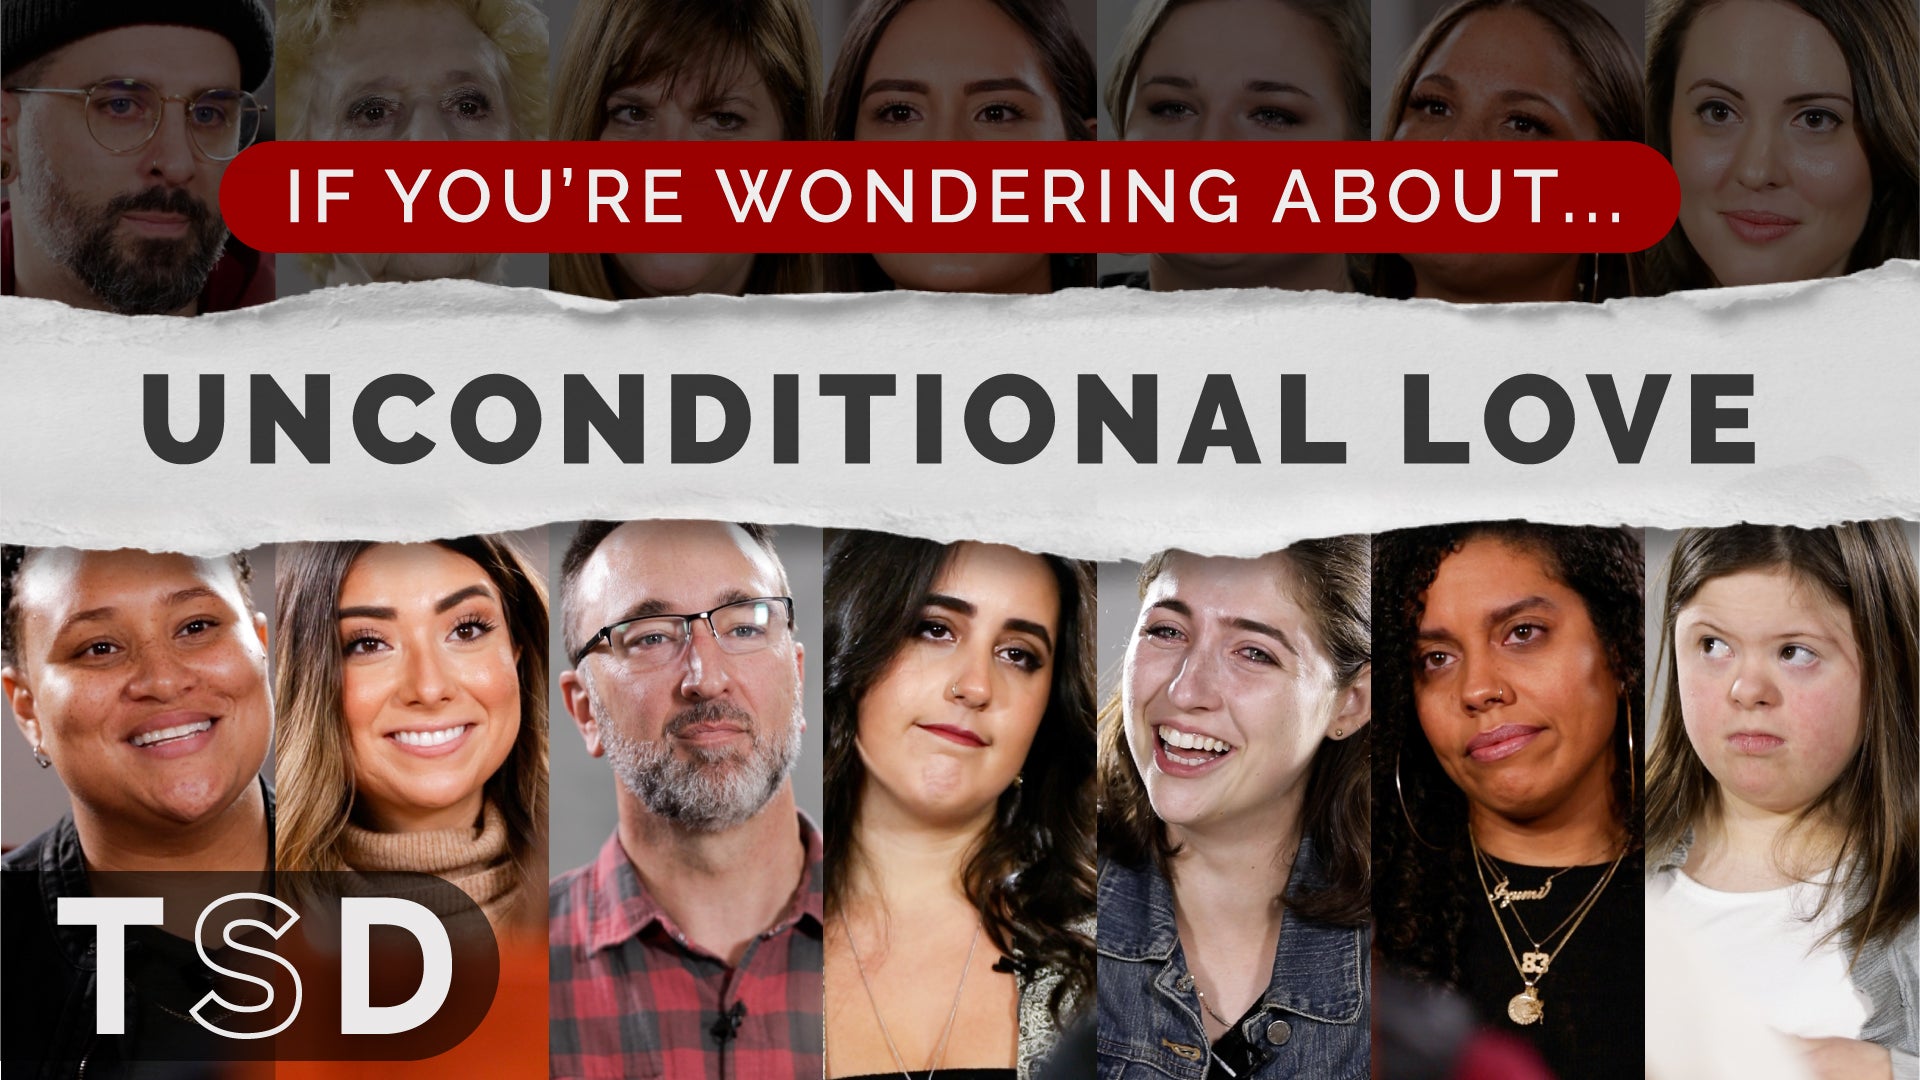 [VIDEO] If You're Wondering About... Unconditional Love